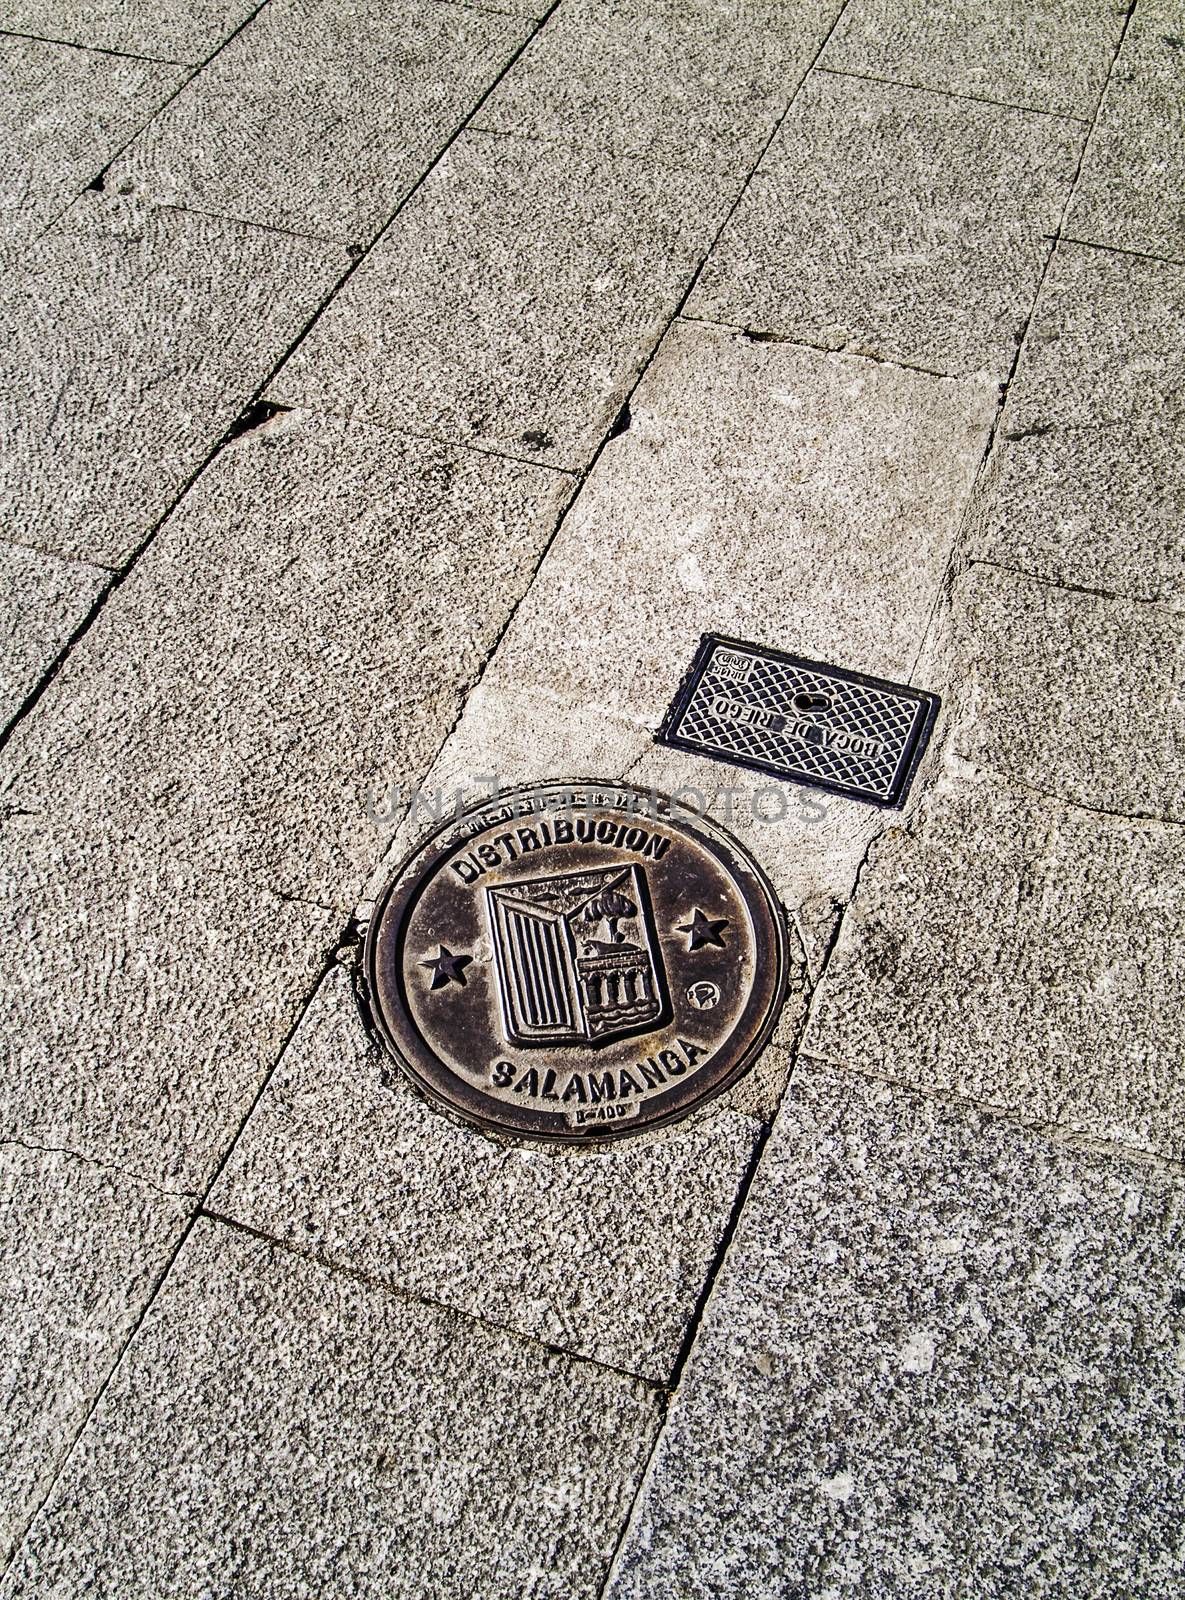 Salamanca, December 2012. Water supply lids with the coat-of-arms of Salamanca in the street pavement.  City of Castilla and Leon region. 150,000 population. UNESCO World Heritage Site since 1988.